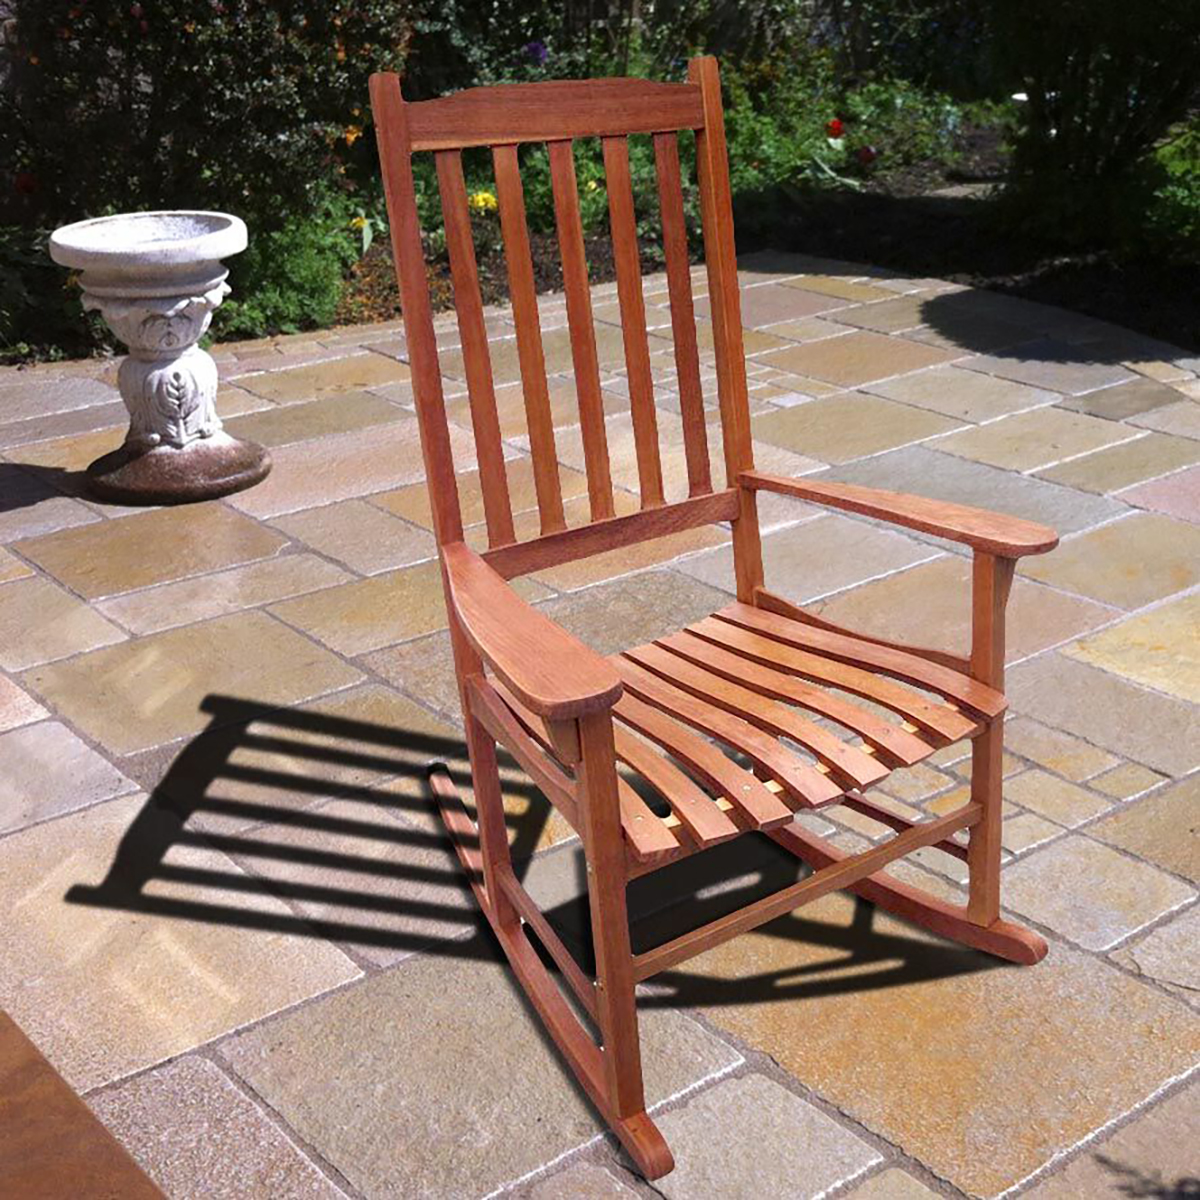 Northbeam Indoor Outdoor Acacia Wood Traditional Rocking Chair, Natural Stained - image 2 of 5